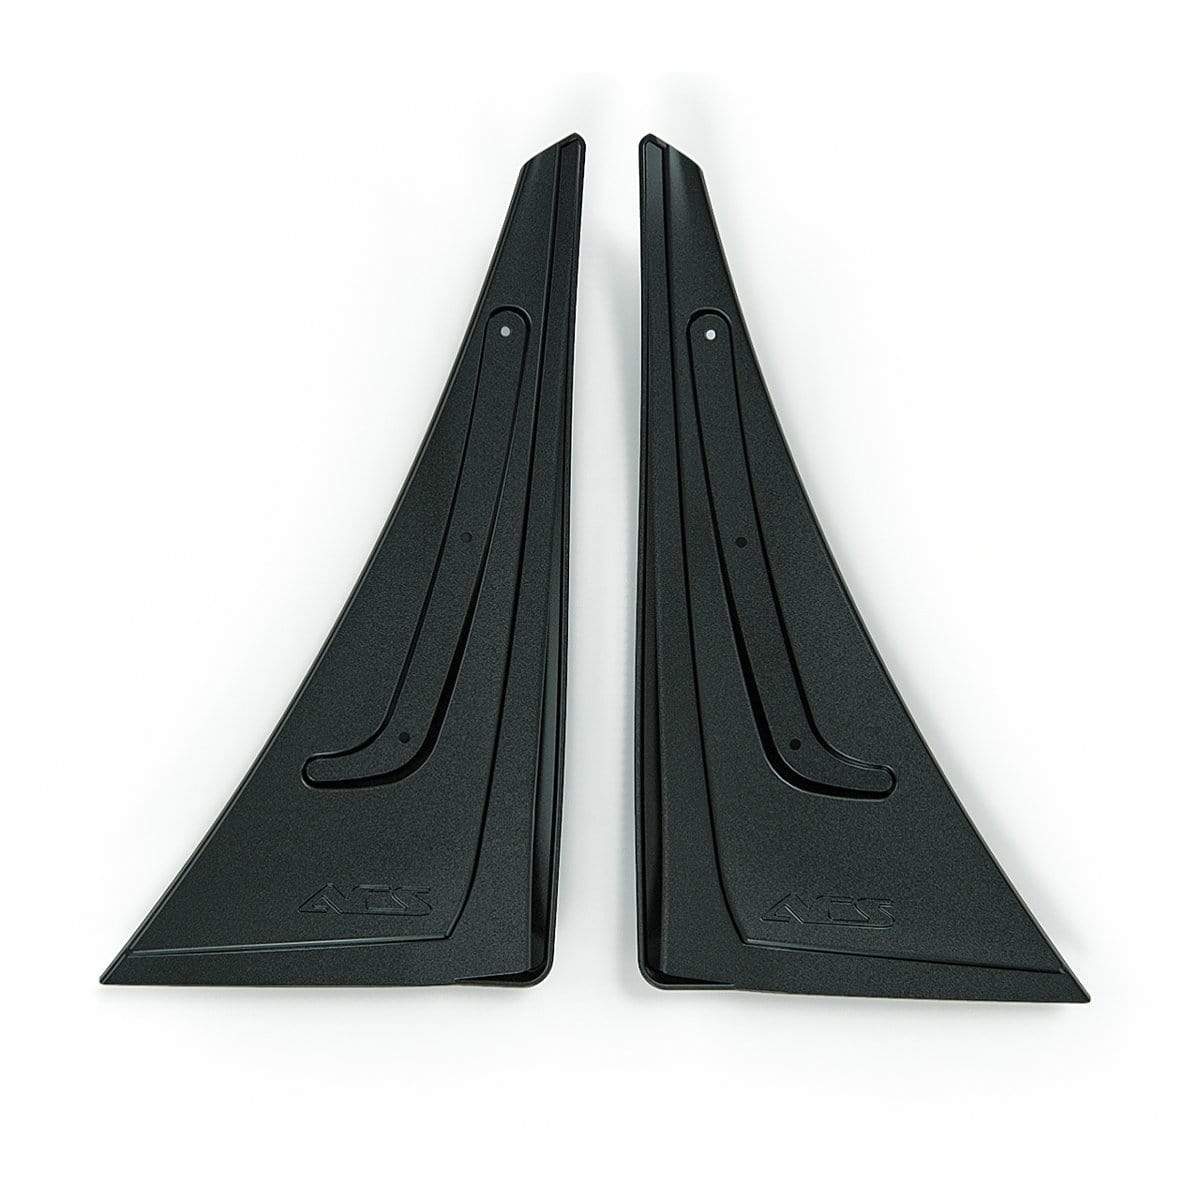 ACS Composite ZL1 Rock Chip Guards in Gloss Black [48-4-105]GBA for Camaro 2016+ - Protect your Camaro from road debris and paint chipping.